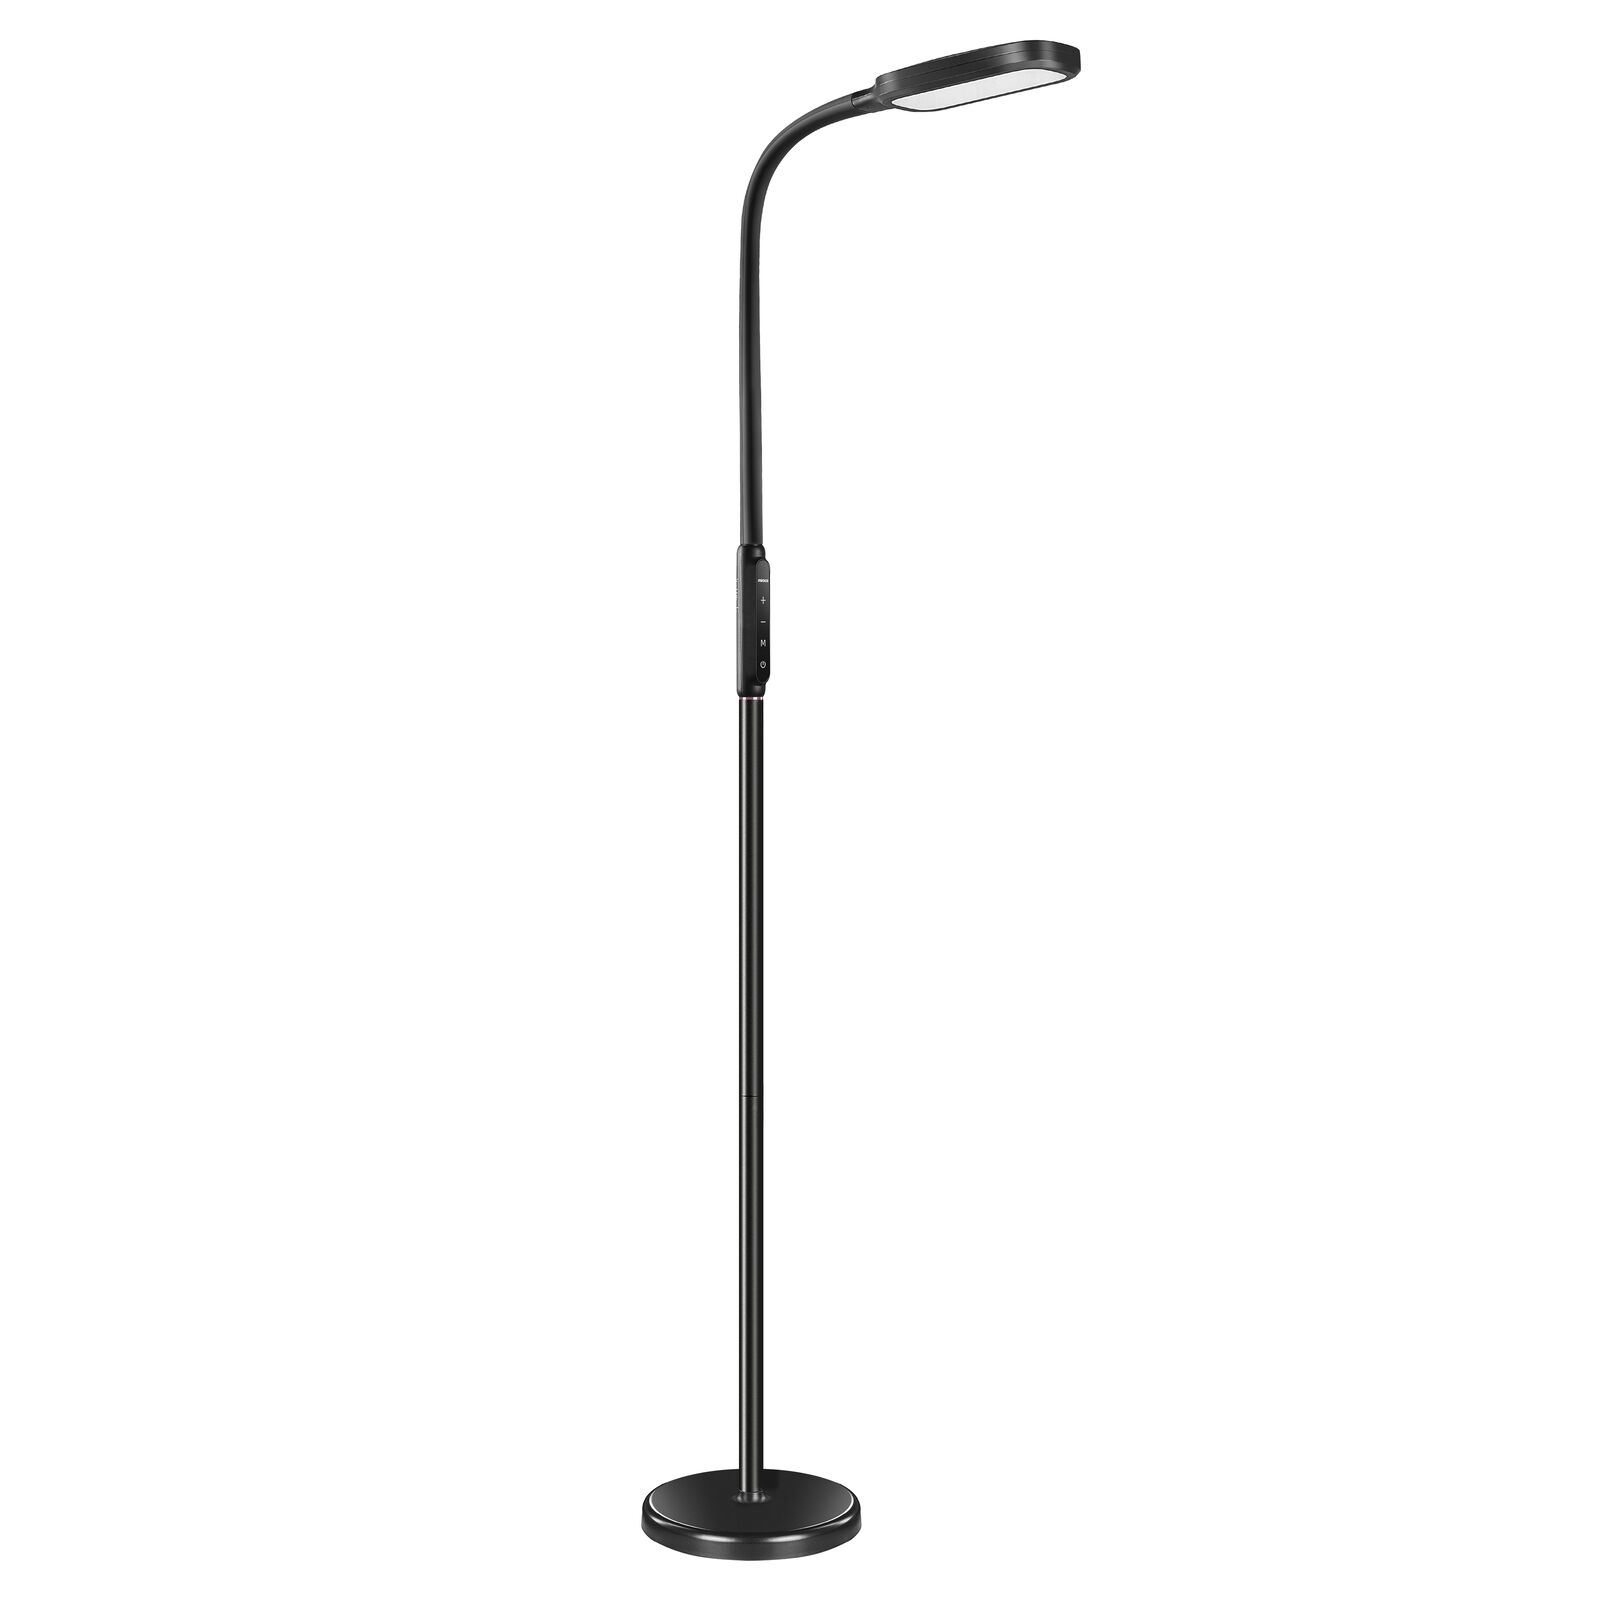 Miroco LED Dimmable Floor Lamp Standing Reading Light for Living Room Office US